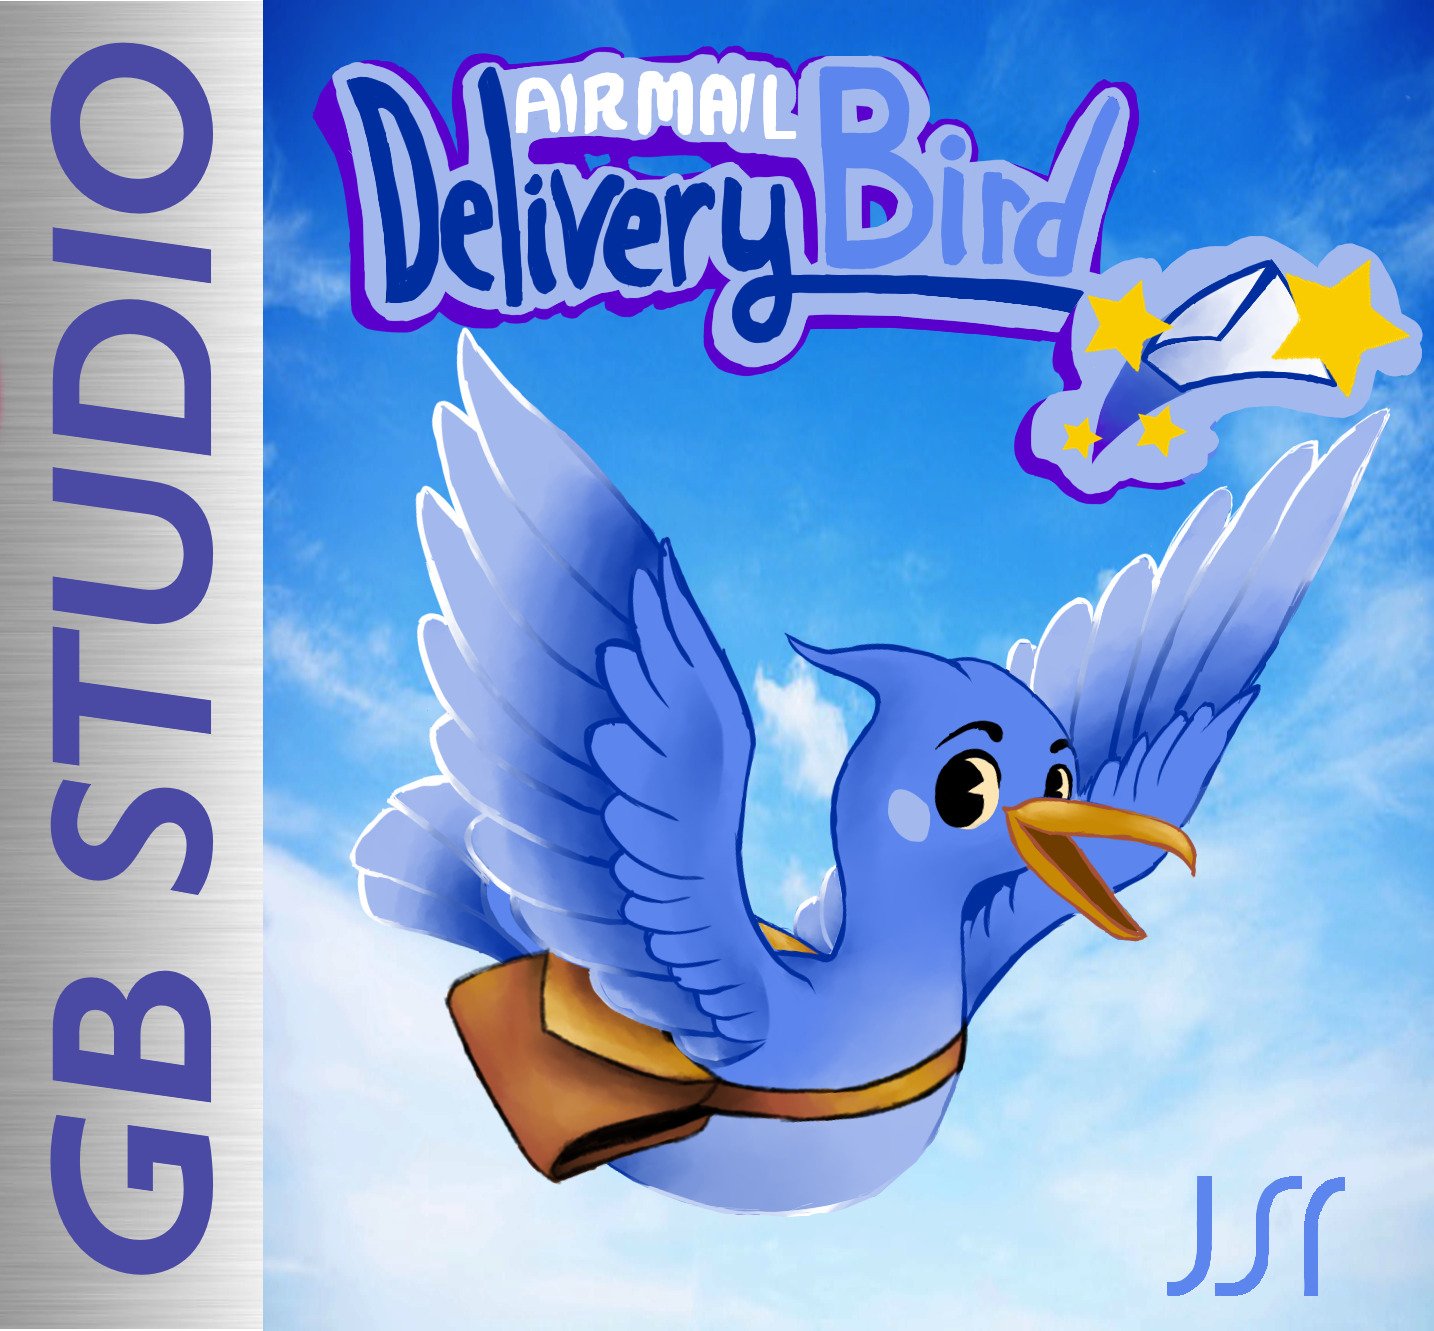 Air Mail Delivery Bird